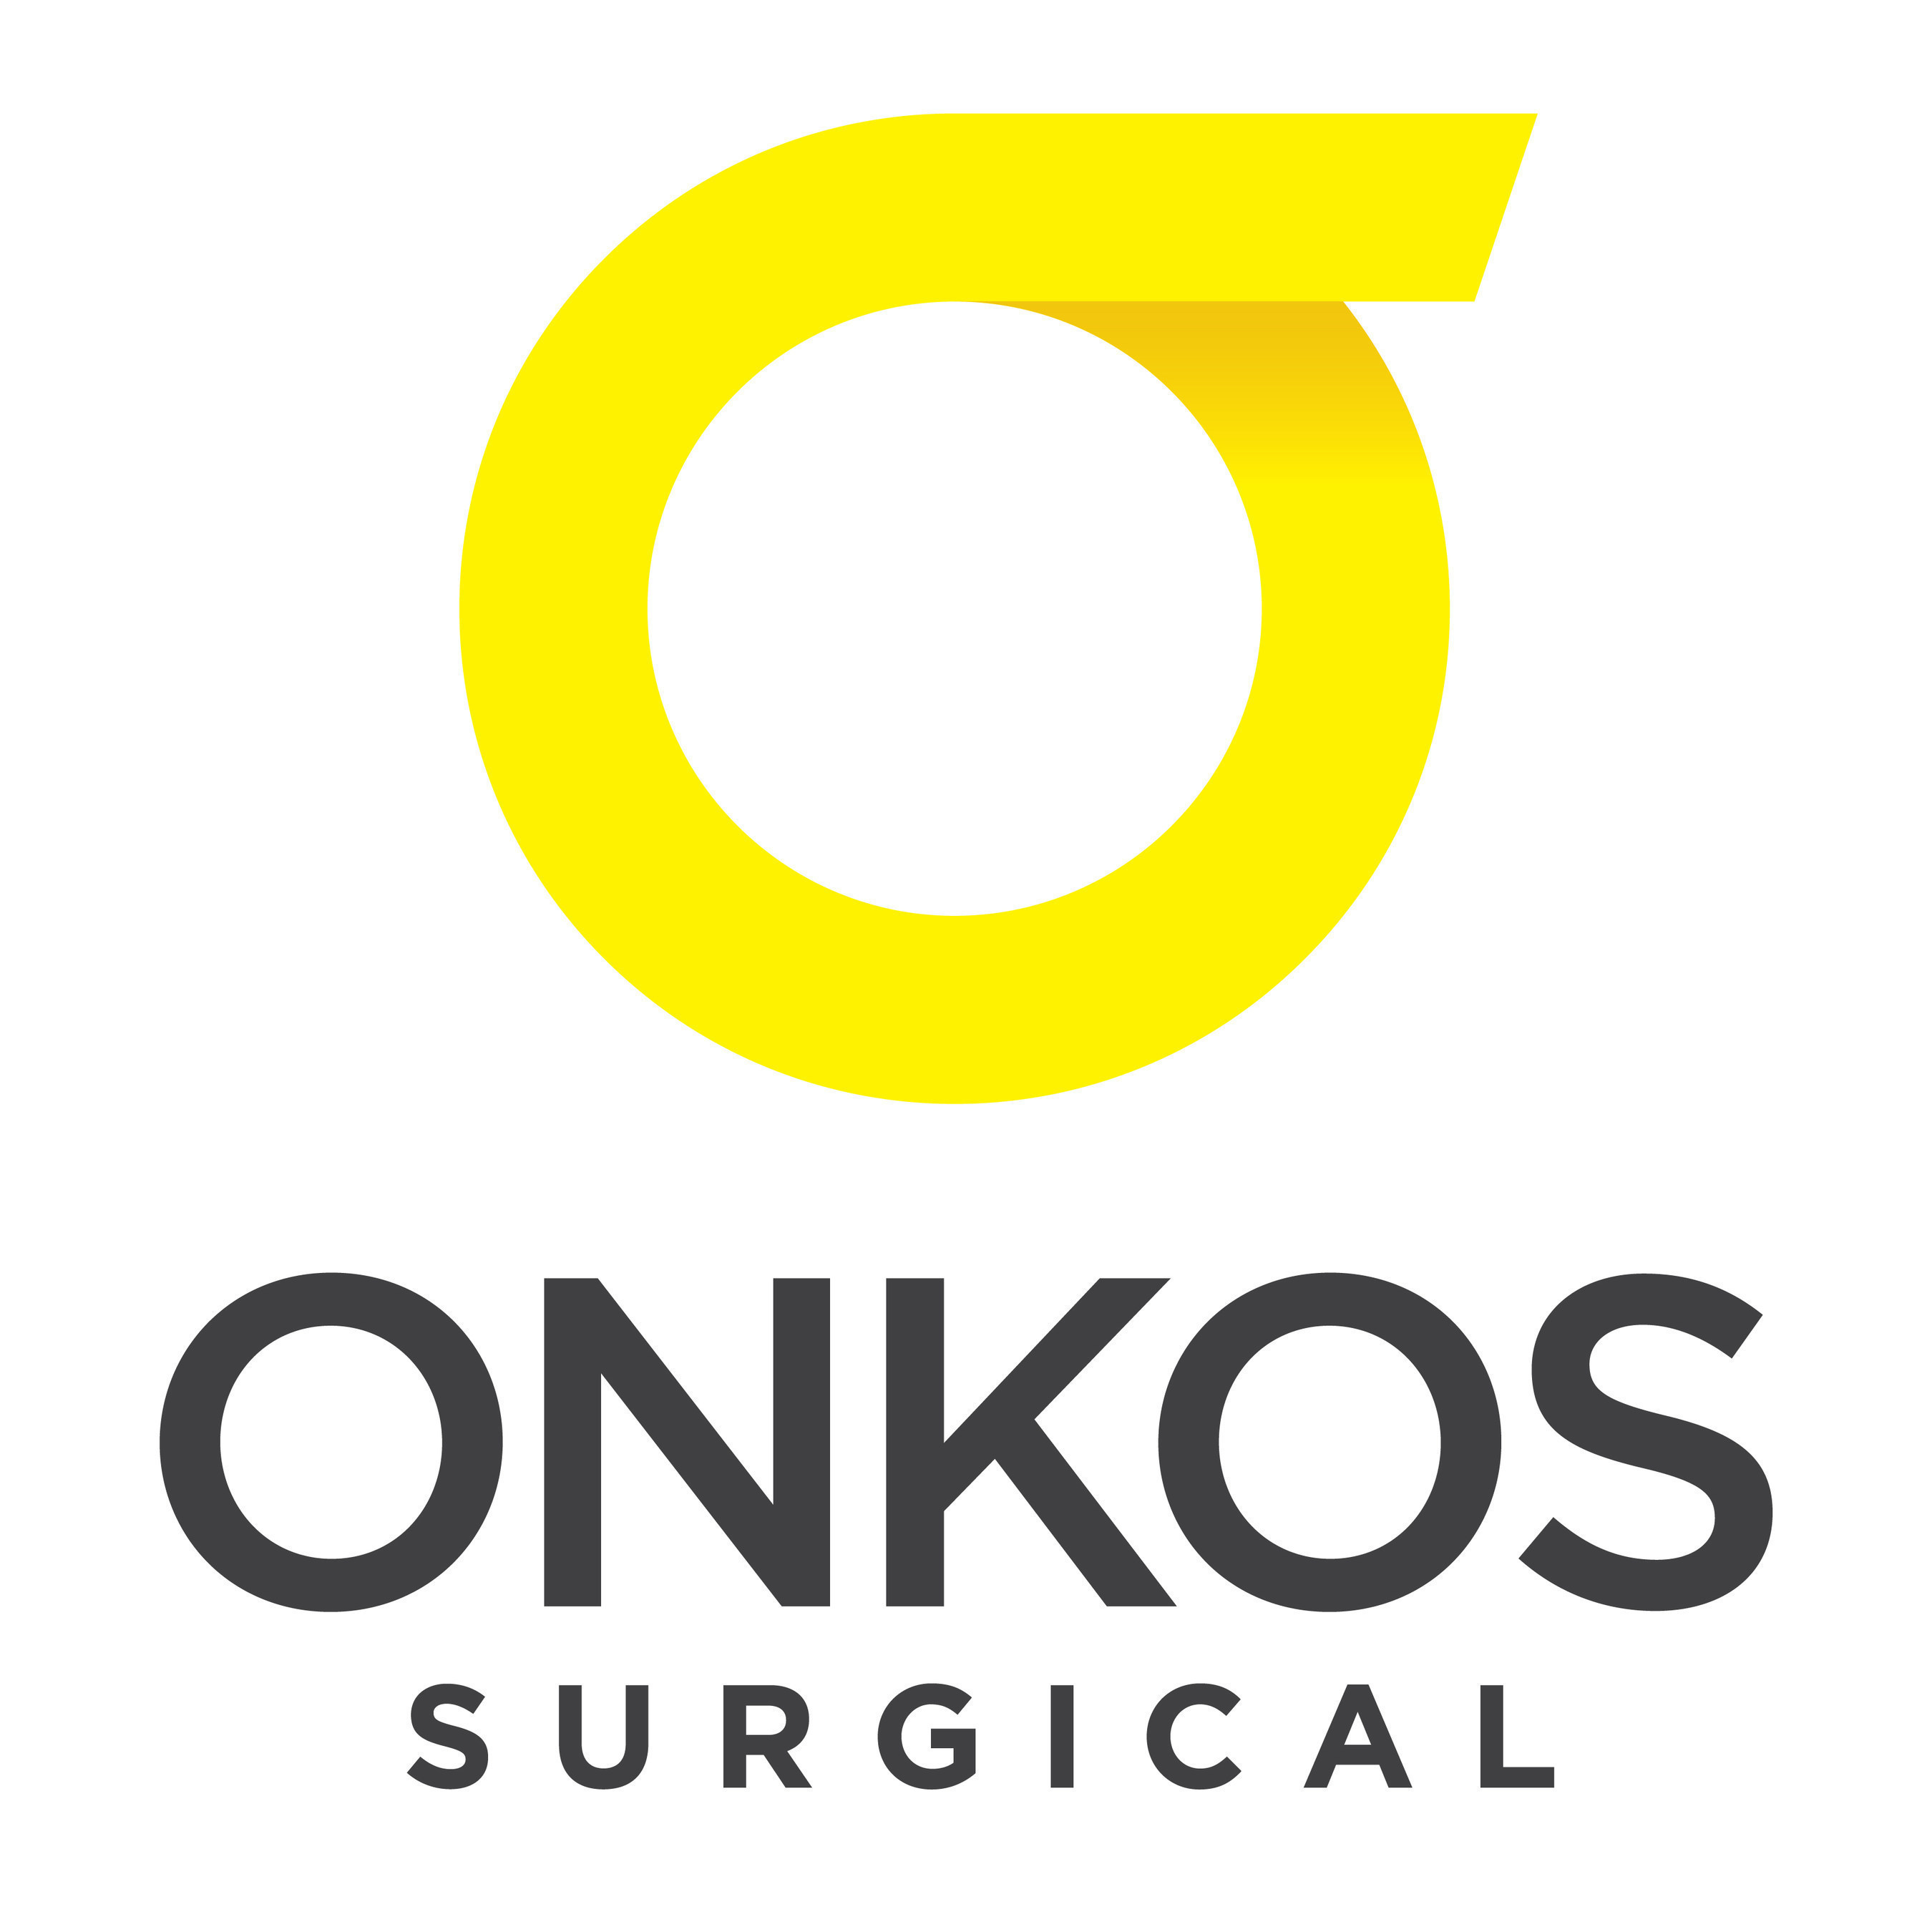 Your Purpose is our Passion. (PRNewsFoto/Onkos Surgical)